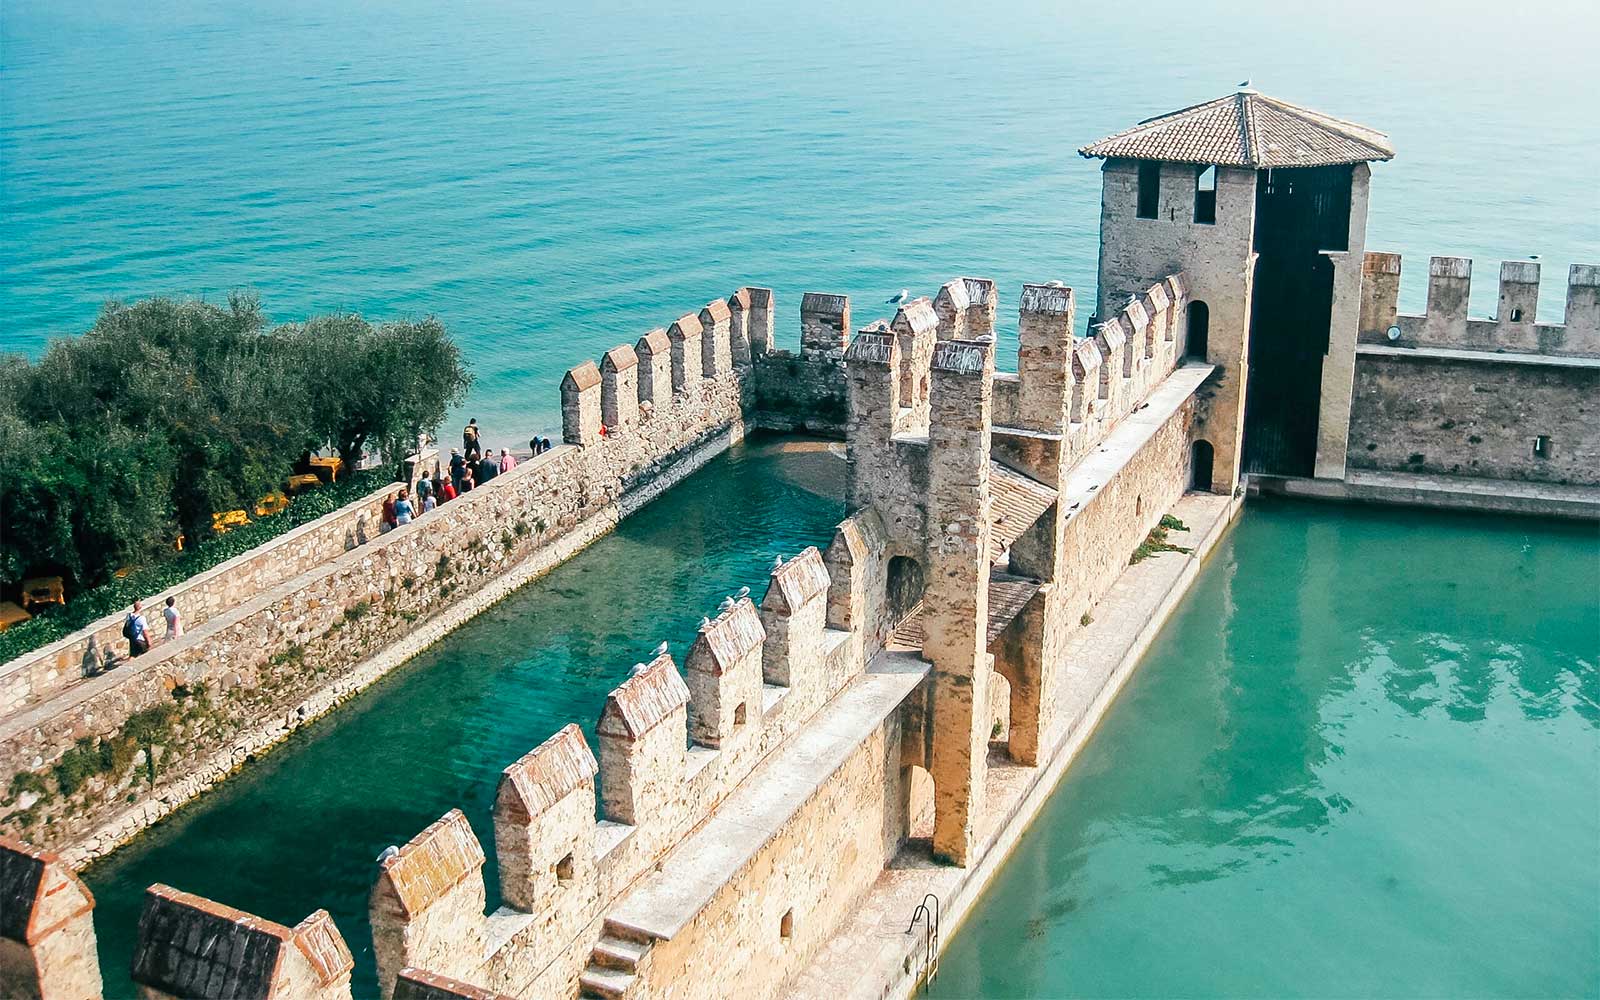 The 5 most beautiful and characteristic castles of Lake Garda